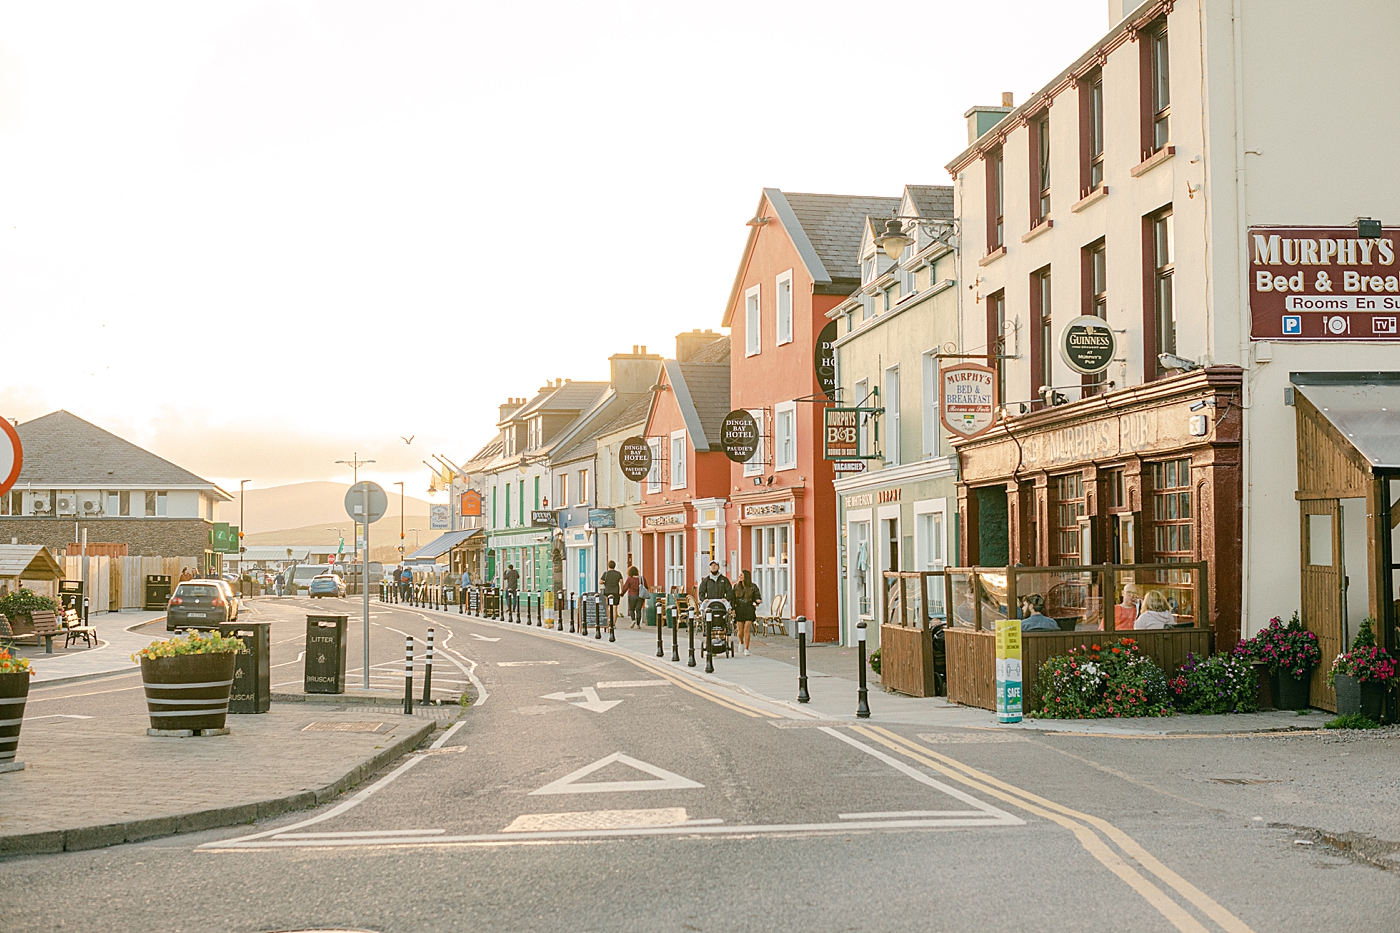 Colorful buildings in a coastal town in Ireland | Photo by Destination Wedding Photographer Hope Helmuth